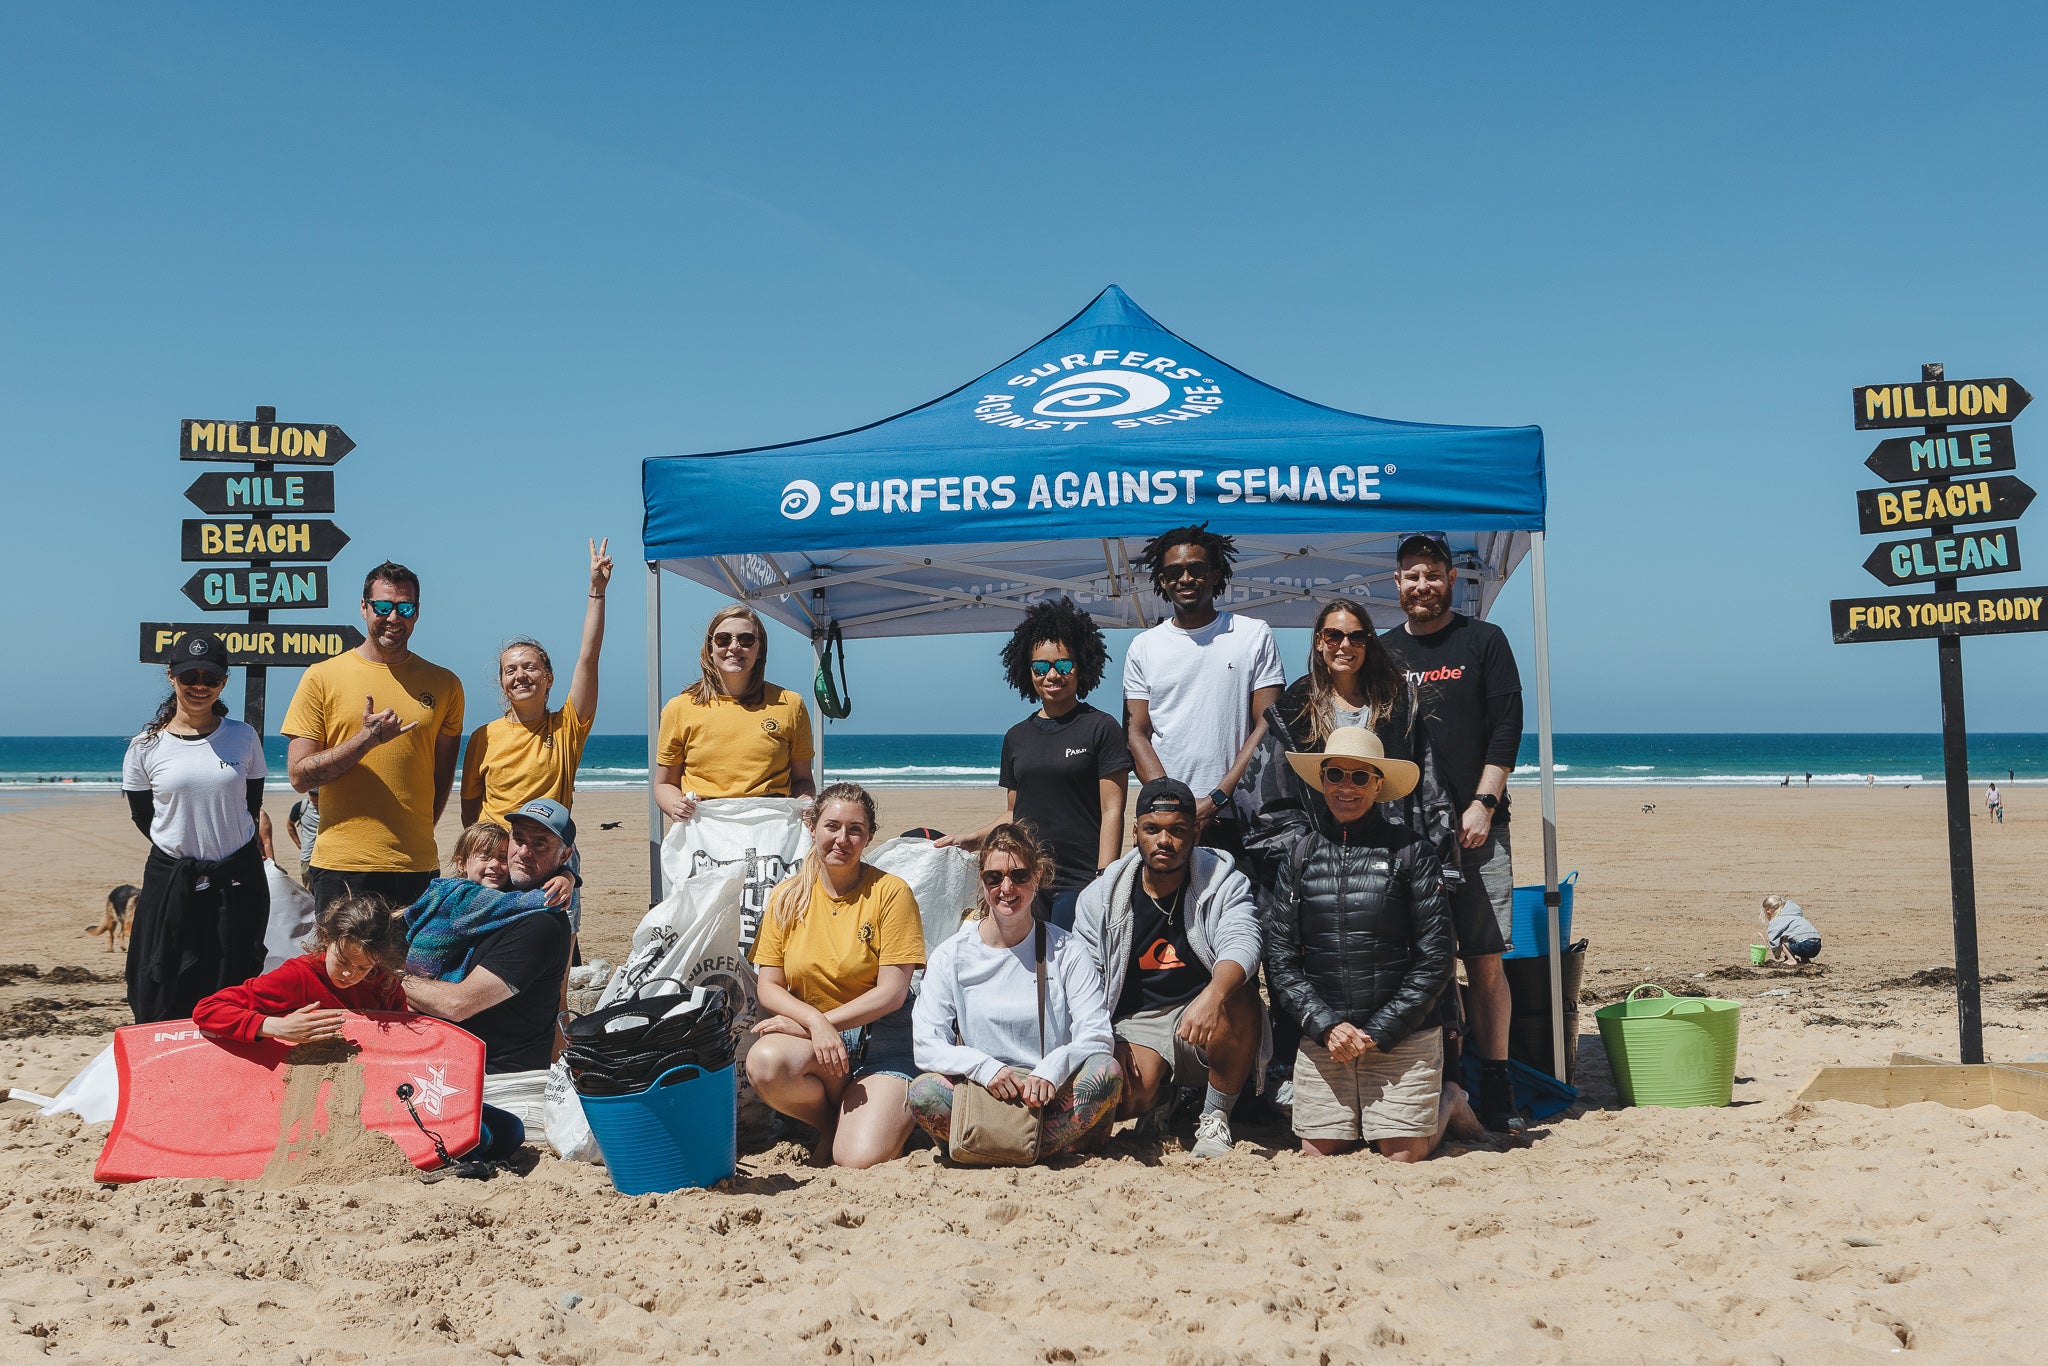 Group photo of Surfers Against Sewage and dryrobe team members